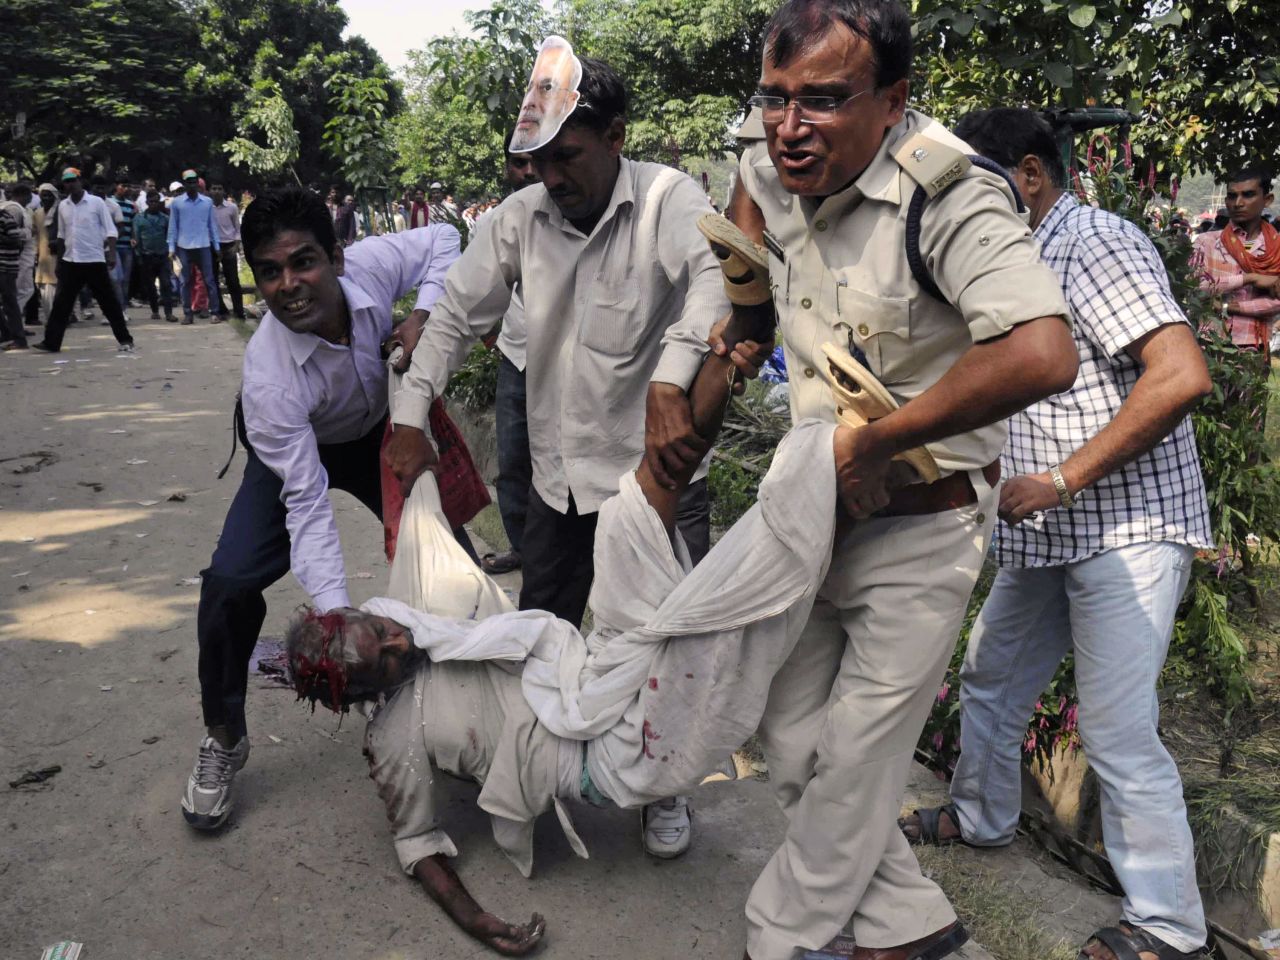 An Indian police officer and bystanders help an injured man when a series of bombs went off before a political rally.